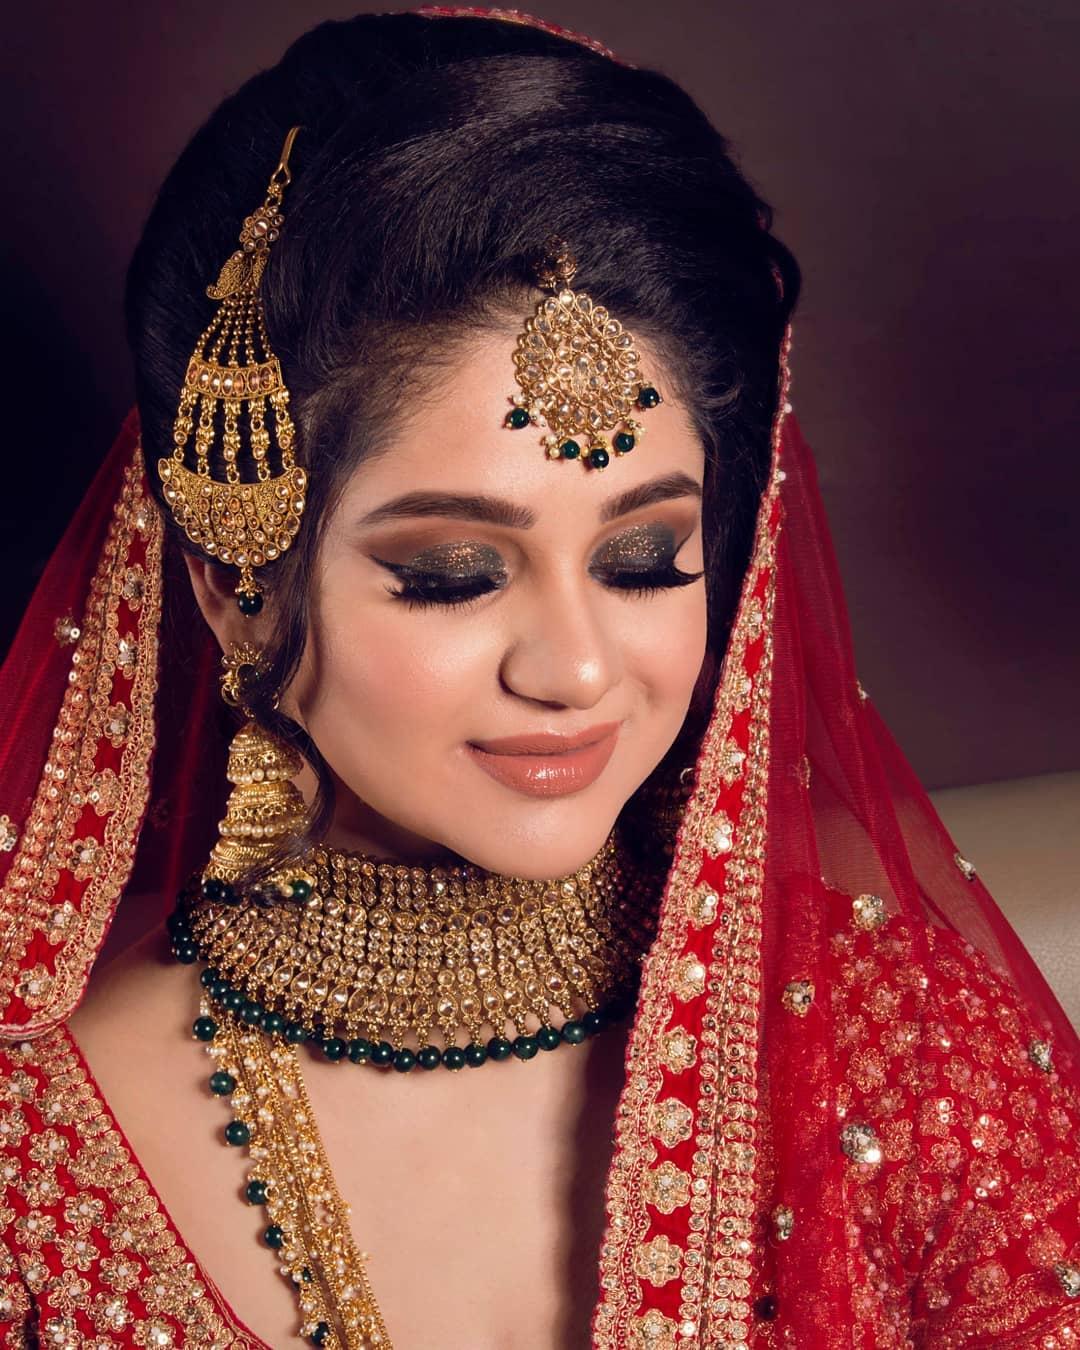 4 Beautiful Bridal Makeup Styles That Brides Across India Love to Use!